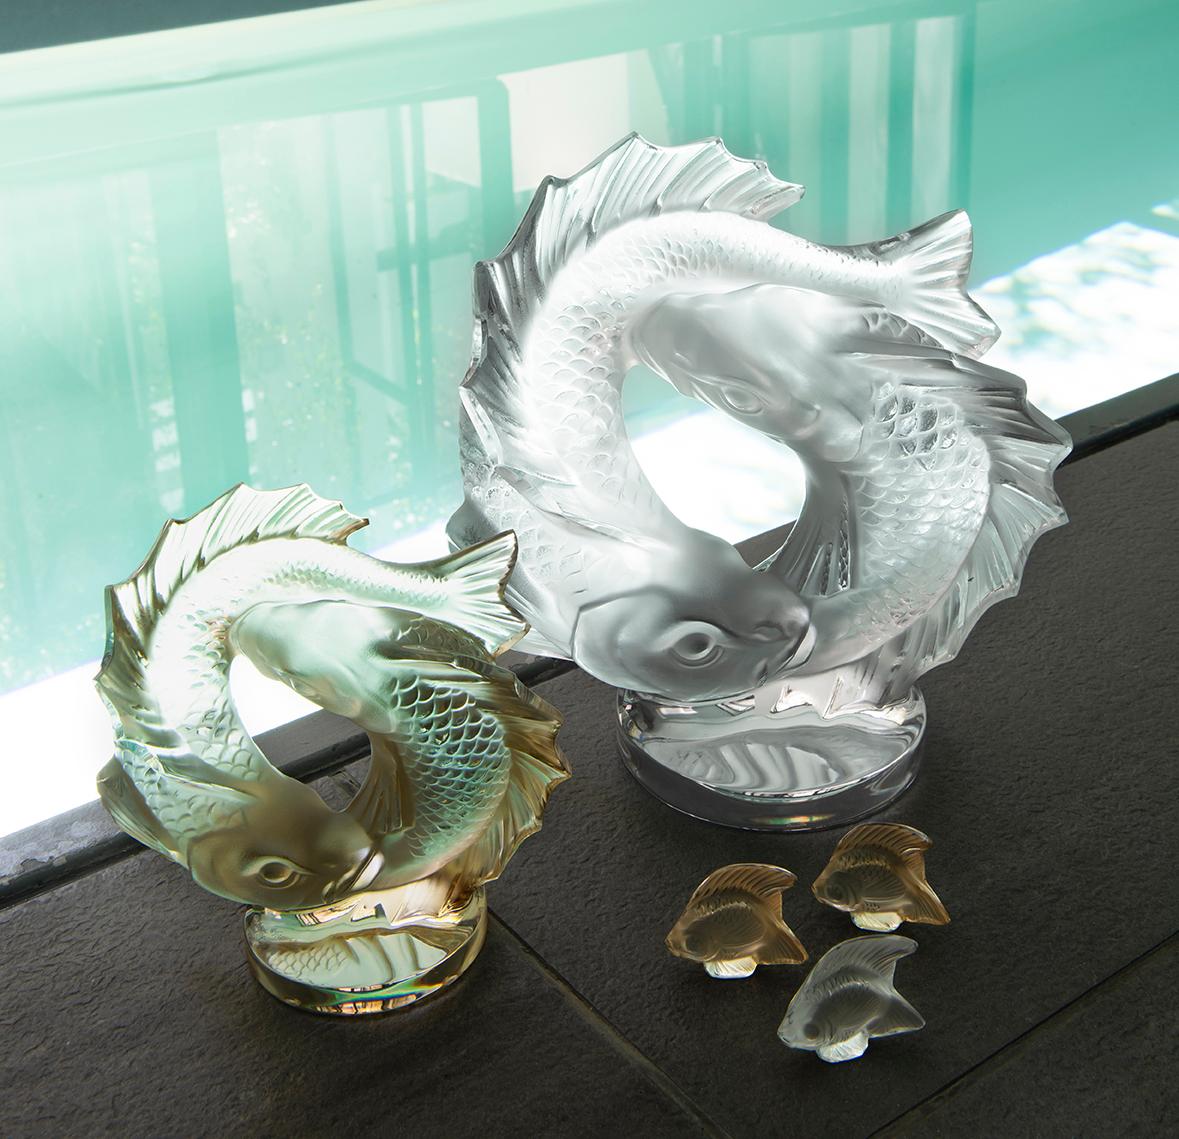 The fish has often inspired Lalique creations. From the fish sculpture created by René Lalique in 1913, to the car mascot Perche, to the Roscoff bowl. This large crystal sculpture was designed in 1953 by Marc Lalique, depicting two fish emerging